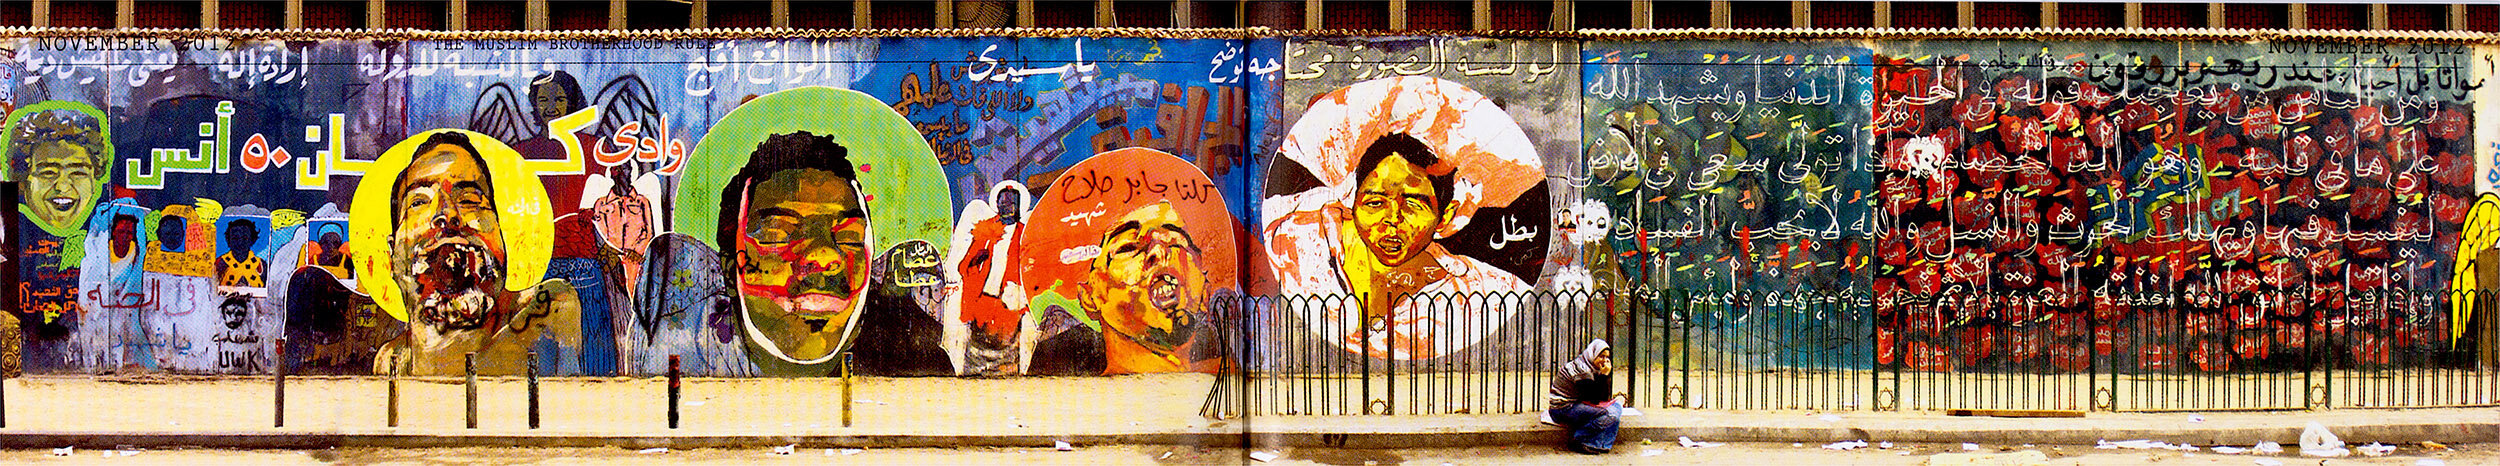 Activist and graffiti artist Ammar Abo Bakr created a mural in Mohamed Mahmoud Street in Cairo depicting martyrs who were tortured and killed by security forces